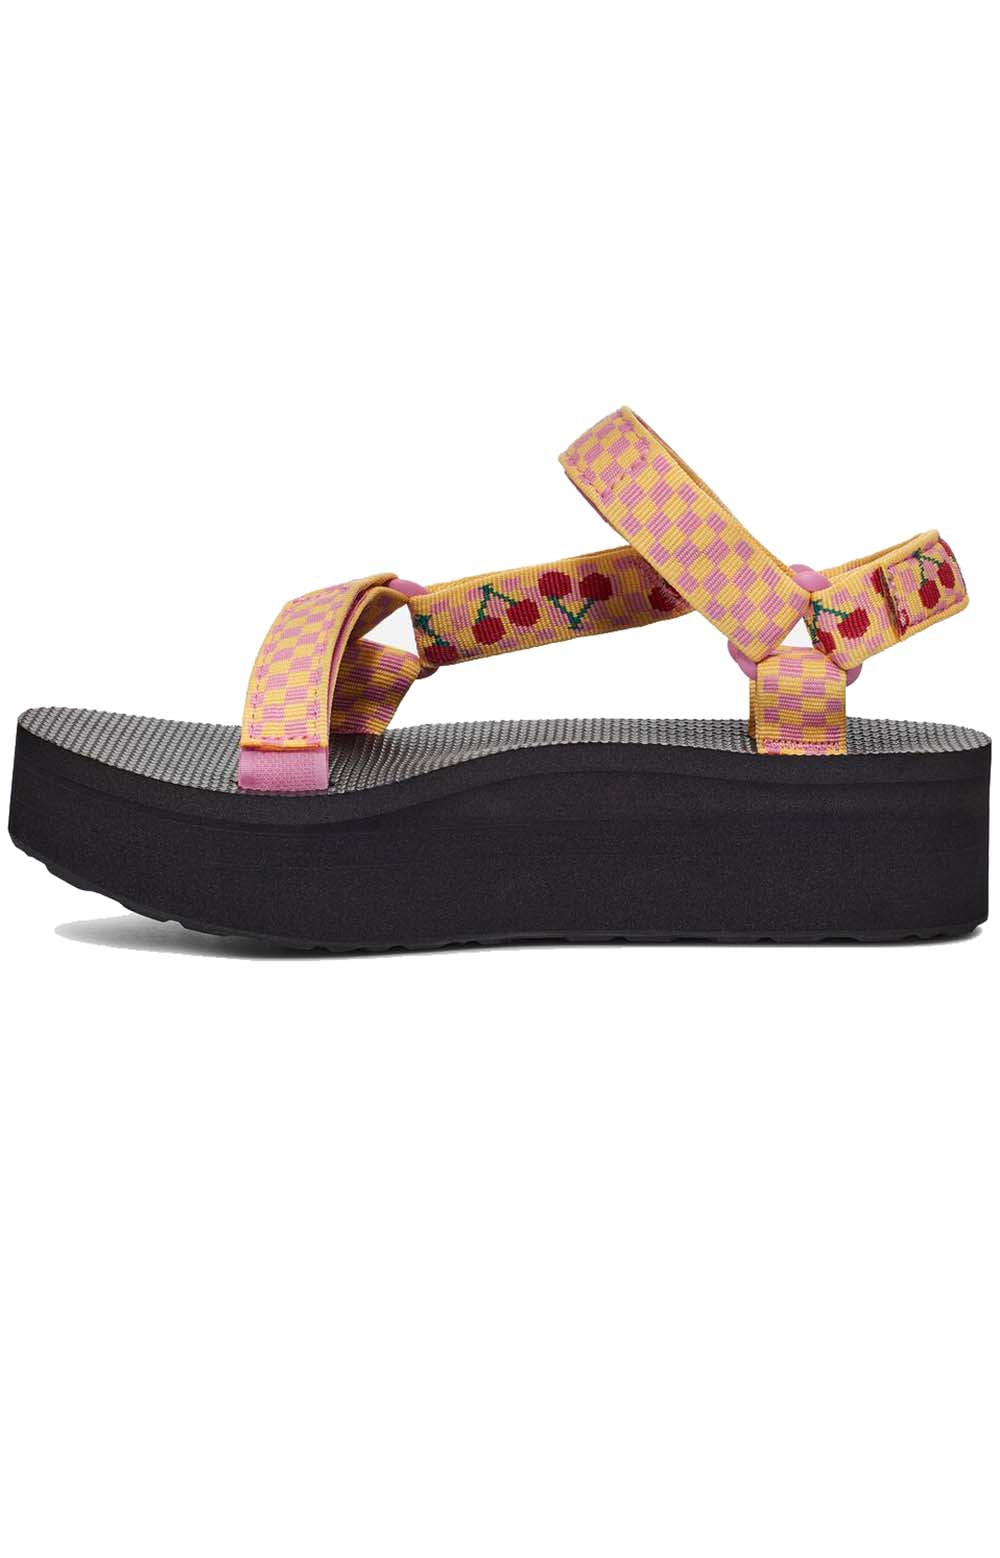 Fashionable and versatile universal flatform sandals with picnic cherries and rosebloom print